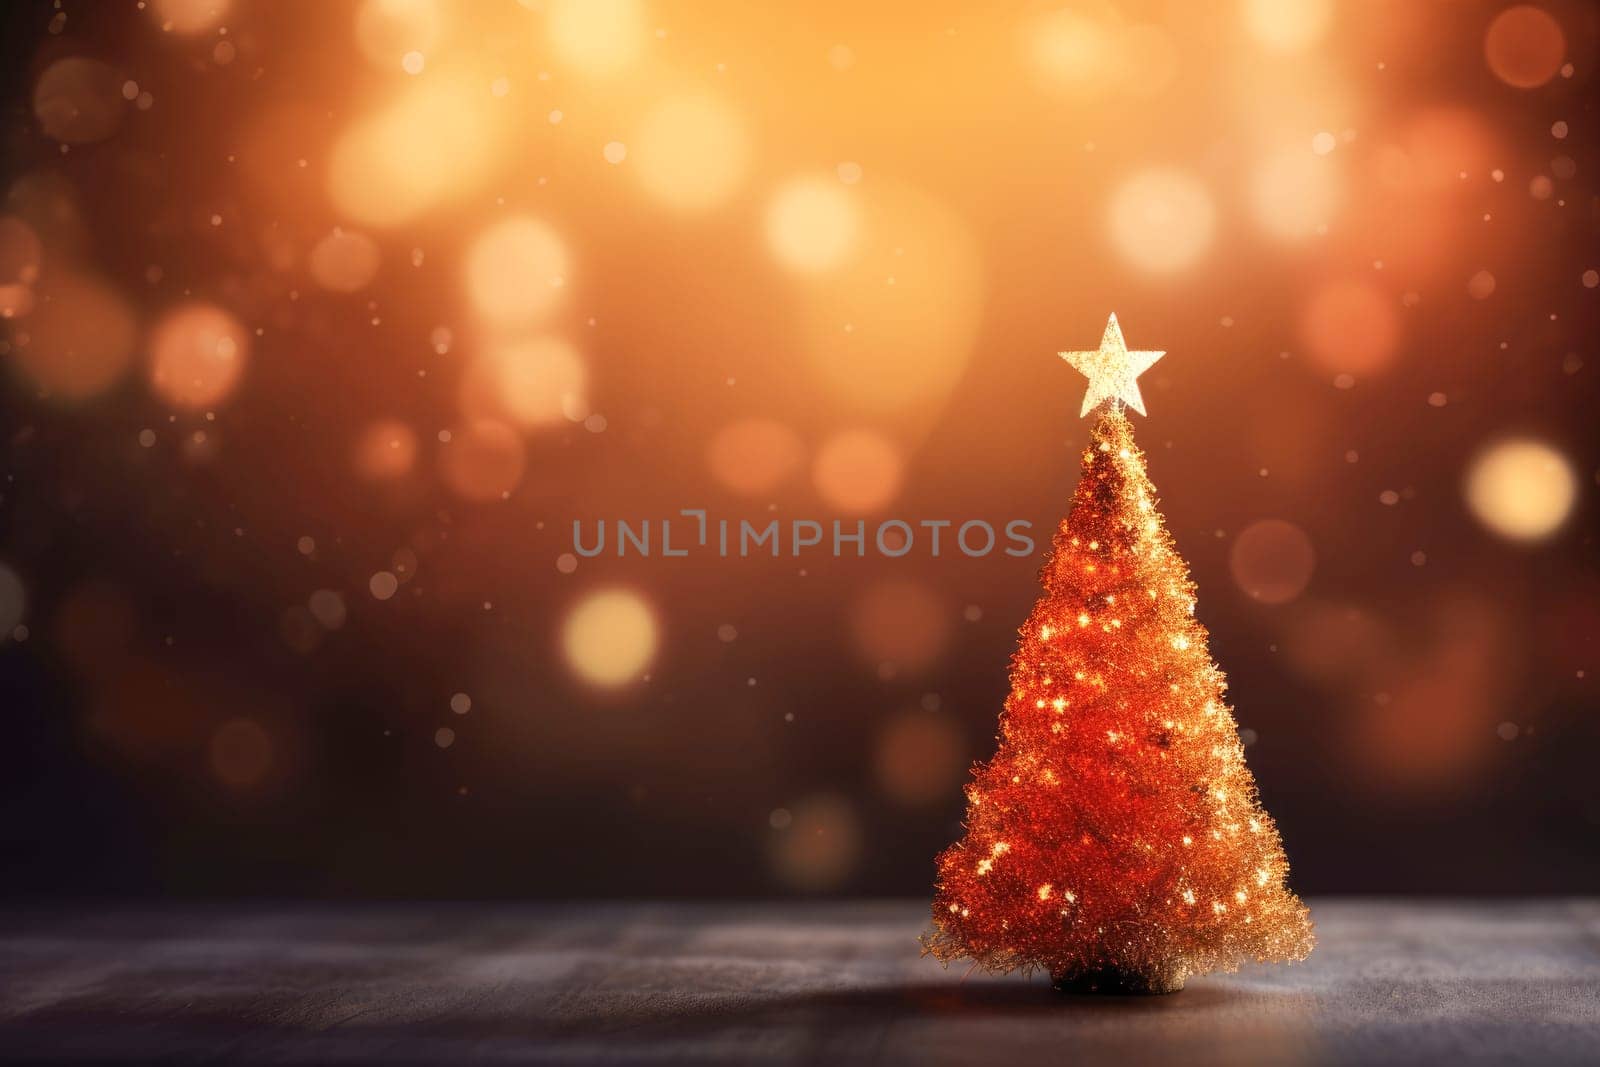 Golden Christmas lights defocused in bokeh effect. Copy space. Can be used as wallpaper. Can be used for New year celebration.